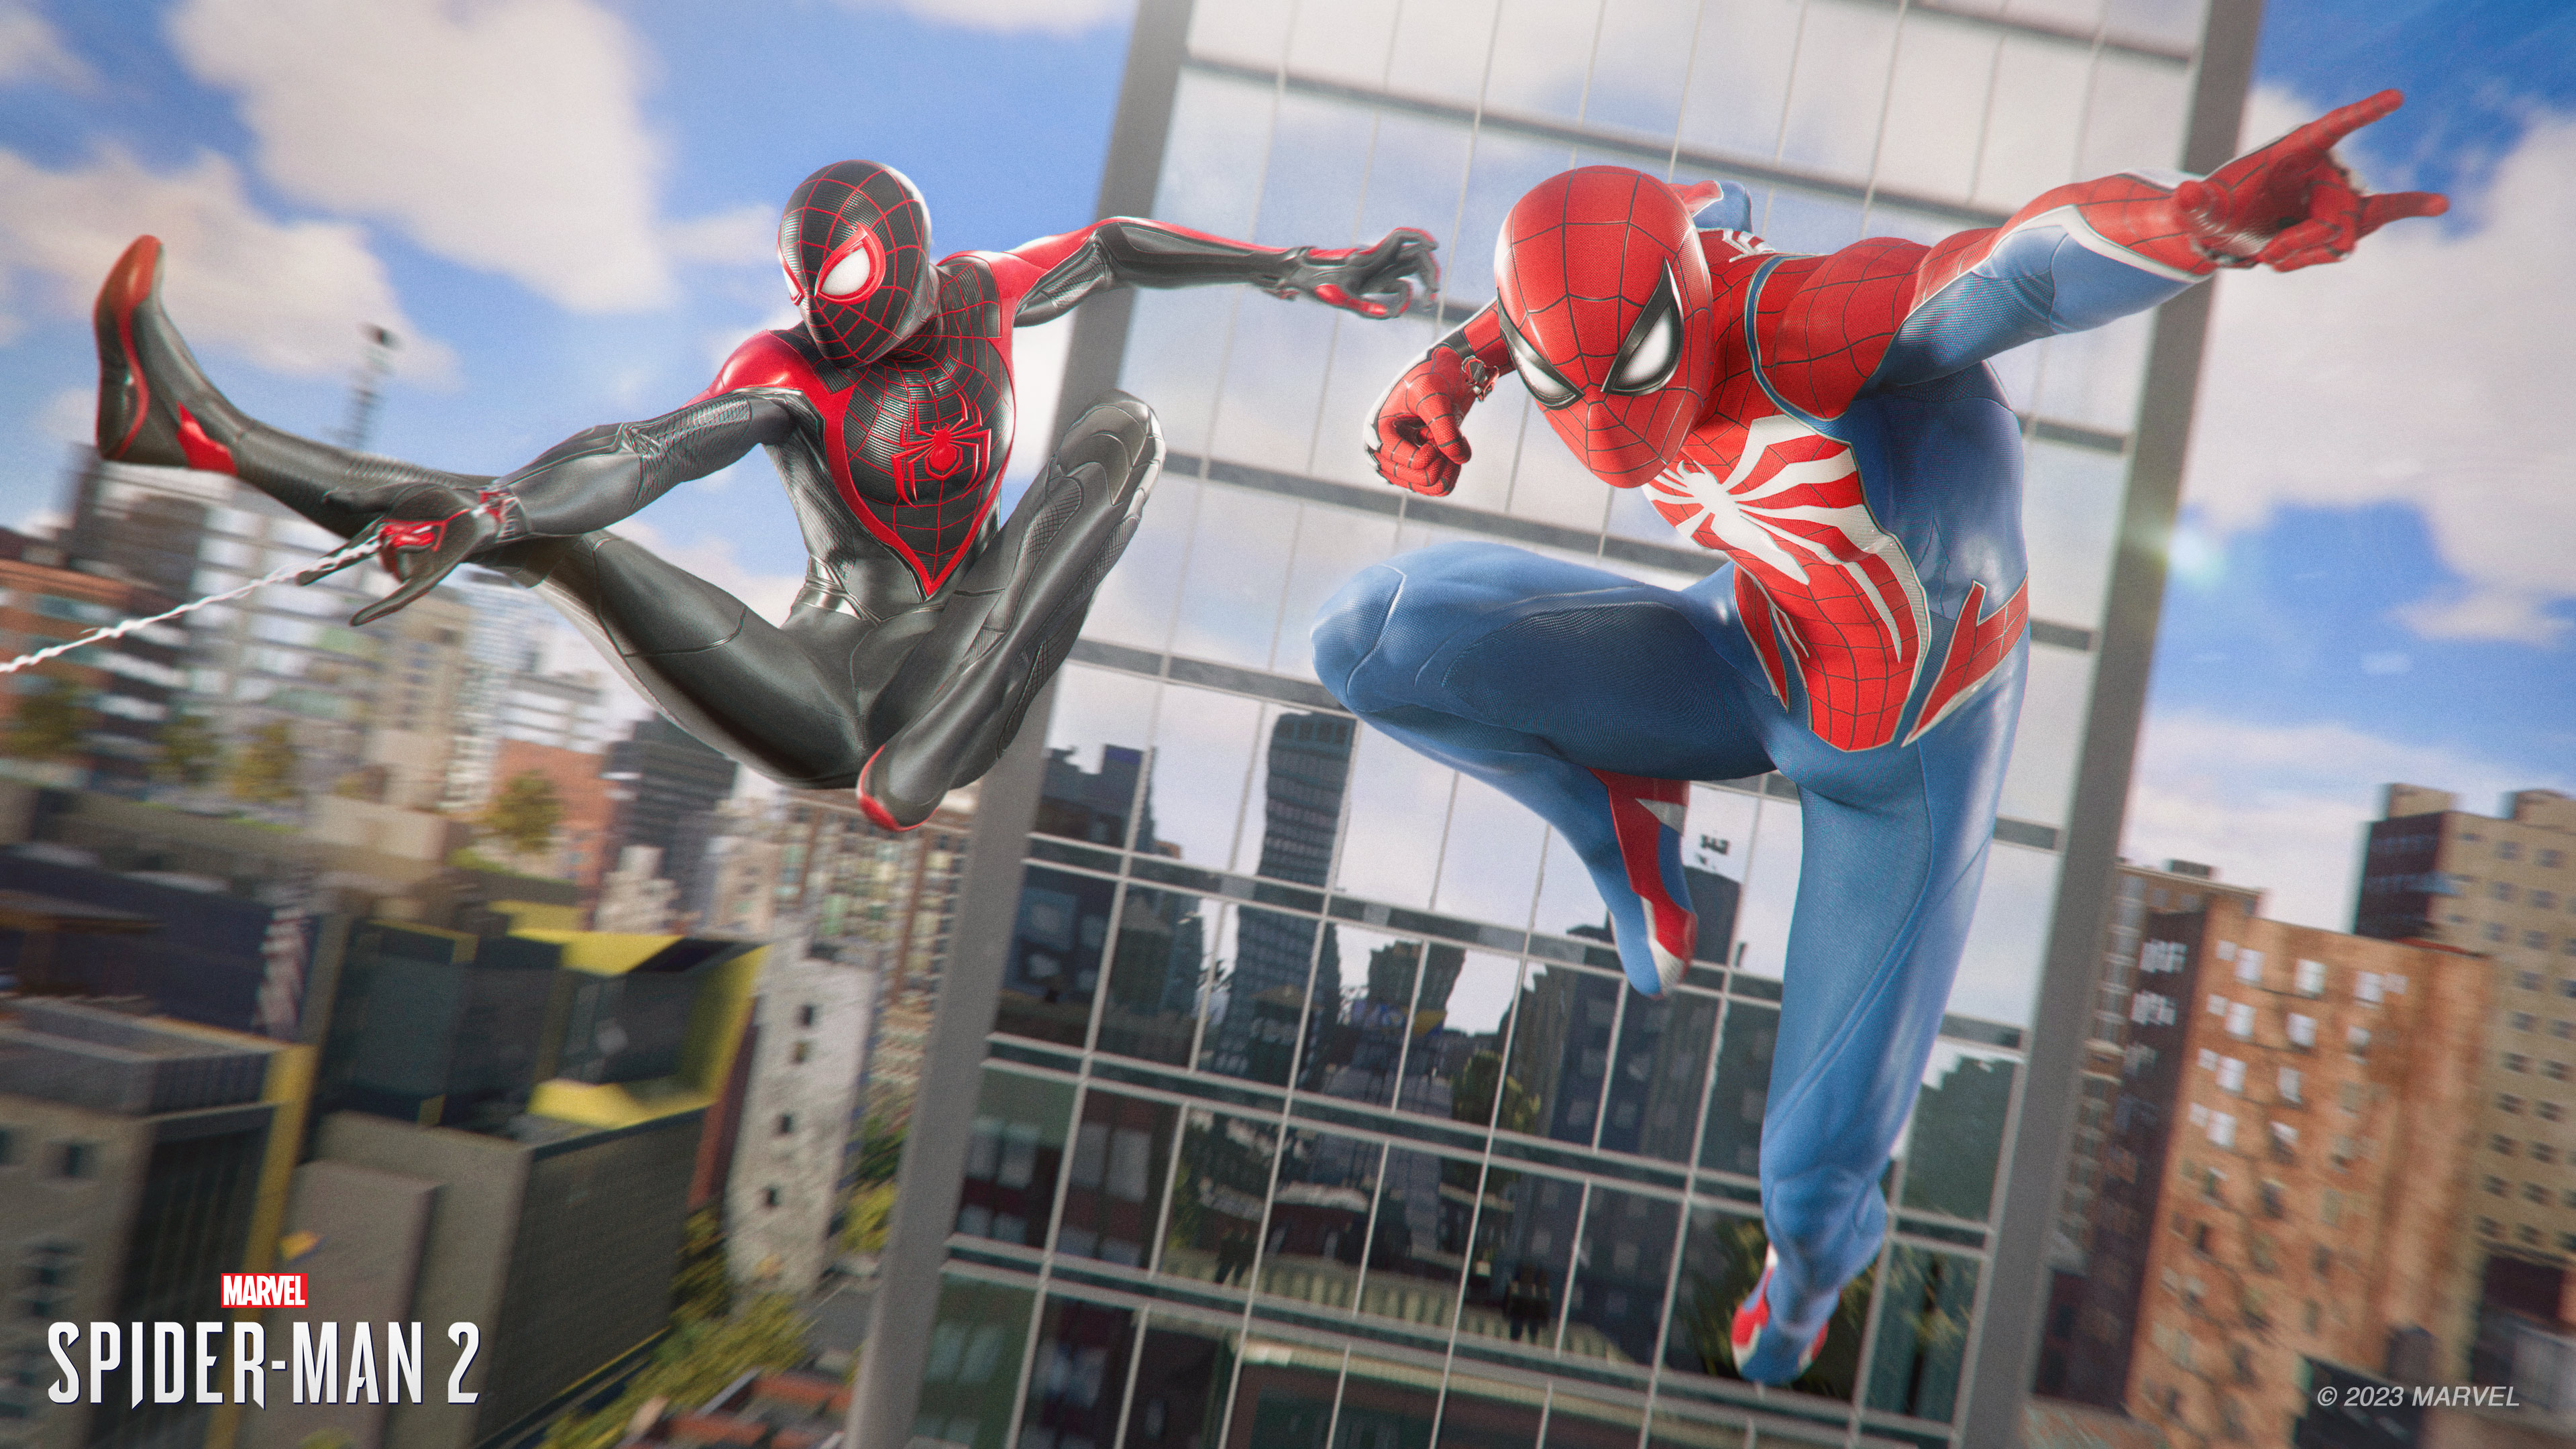 HHW Gaming: No Cap, Critics Are Saying ‘Marvel’s Spider-Man 2’ Is The Greatest Superhero Game Ever